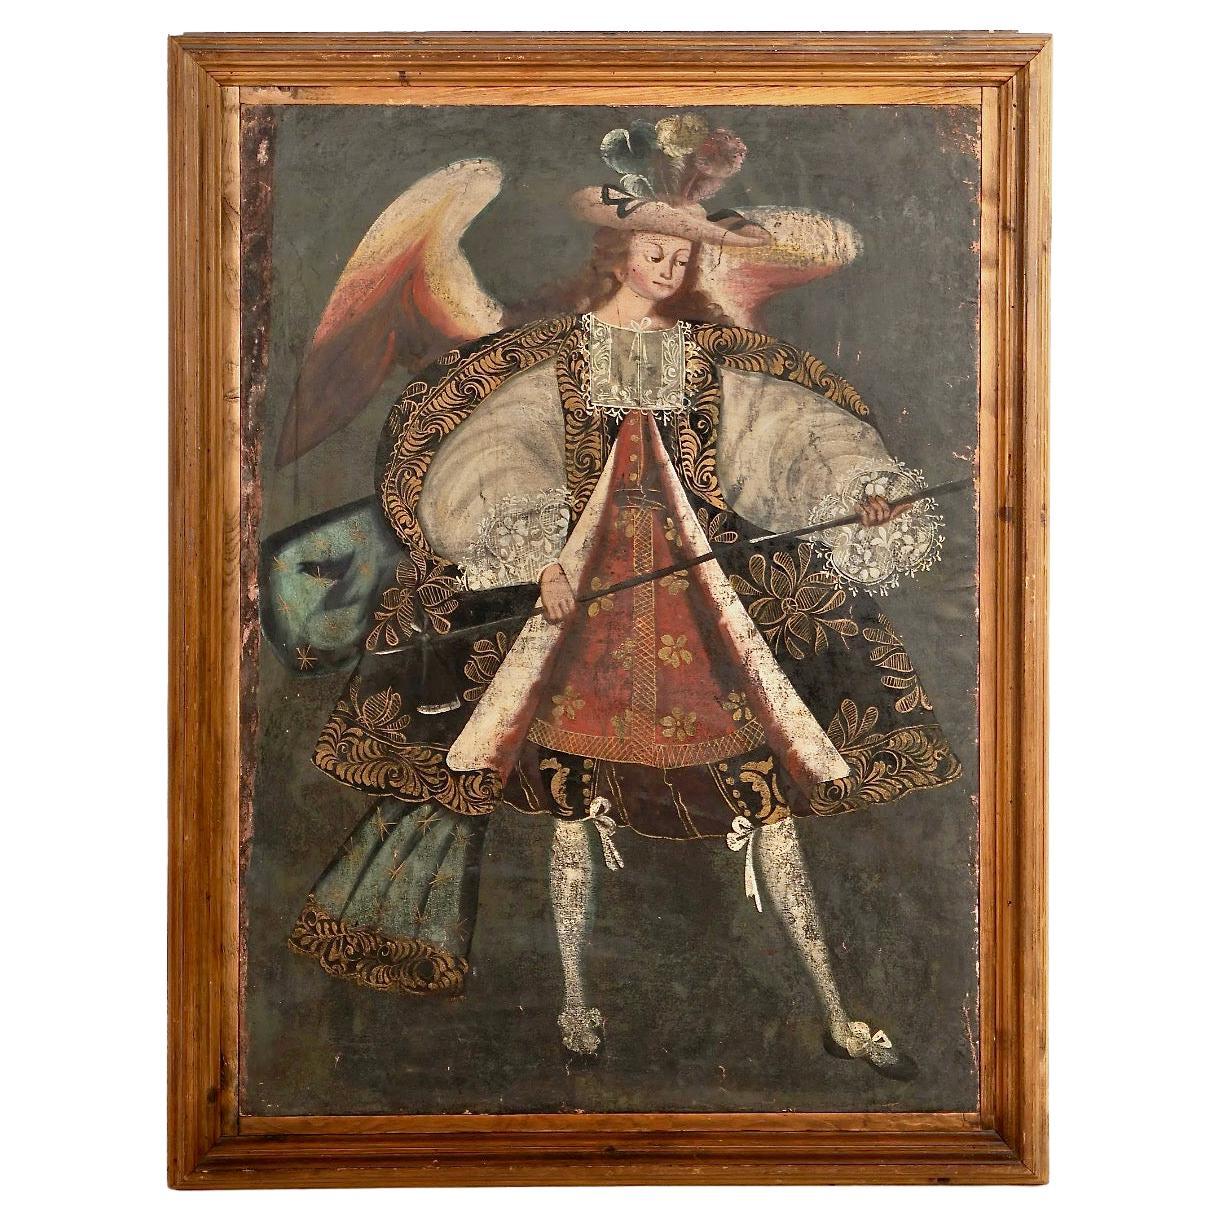 Large Spanish Colonial Cuzco School Painting, Mid-18th Century